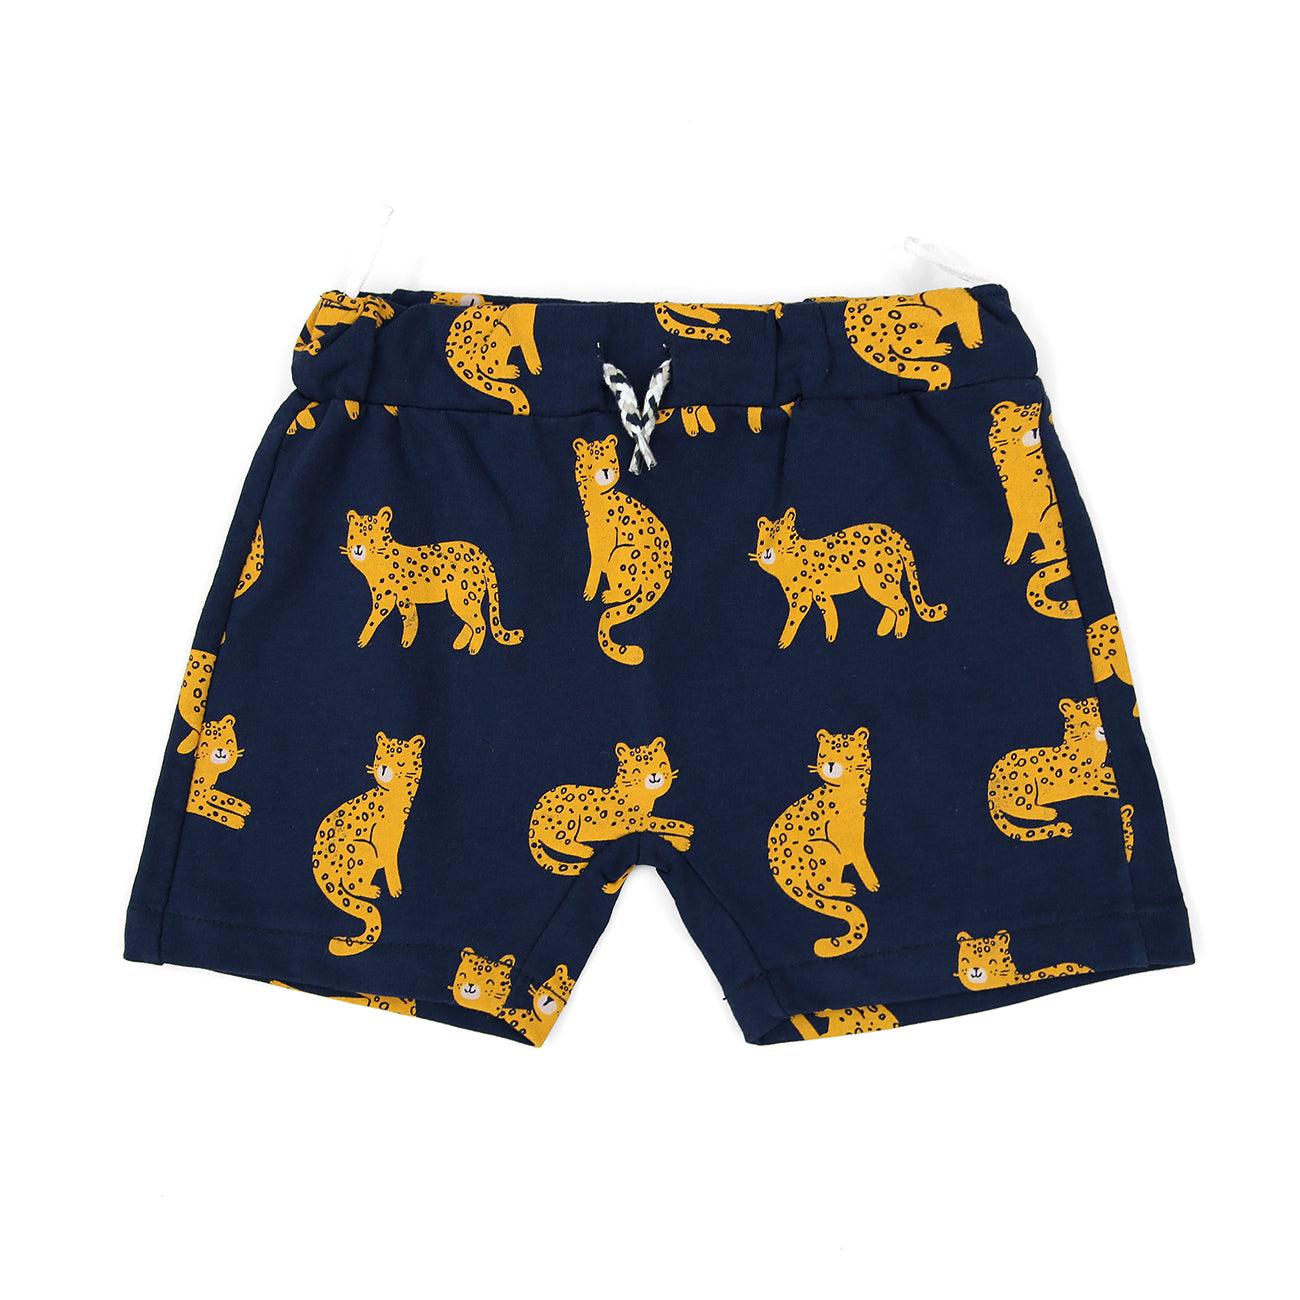 Premium Quality All-Over Printed Soft Cotton Short For Kids (BA-11639) - Brands River